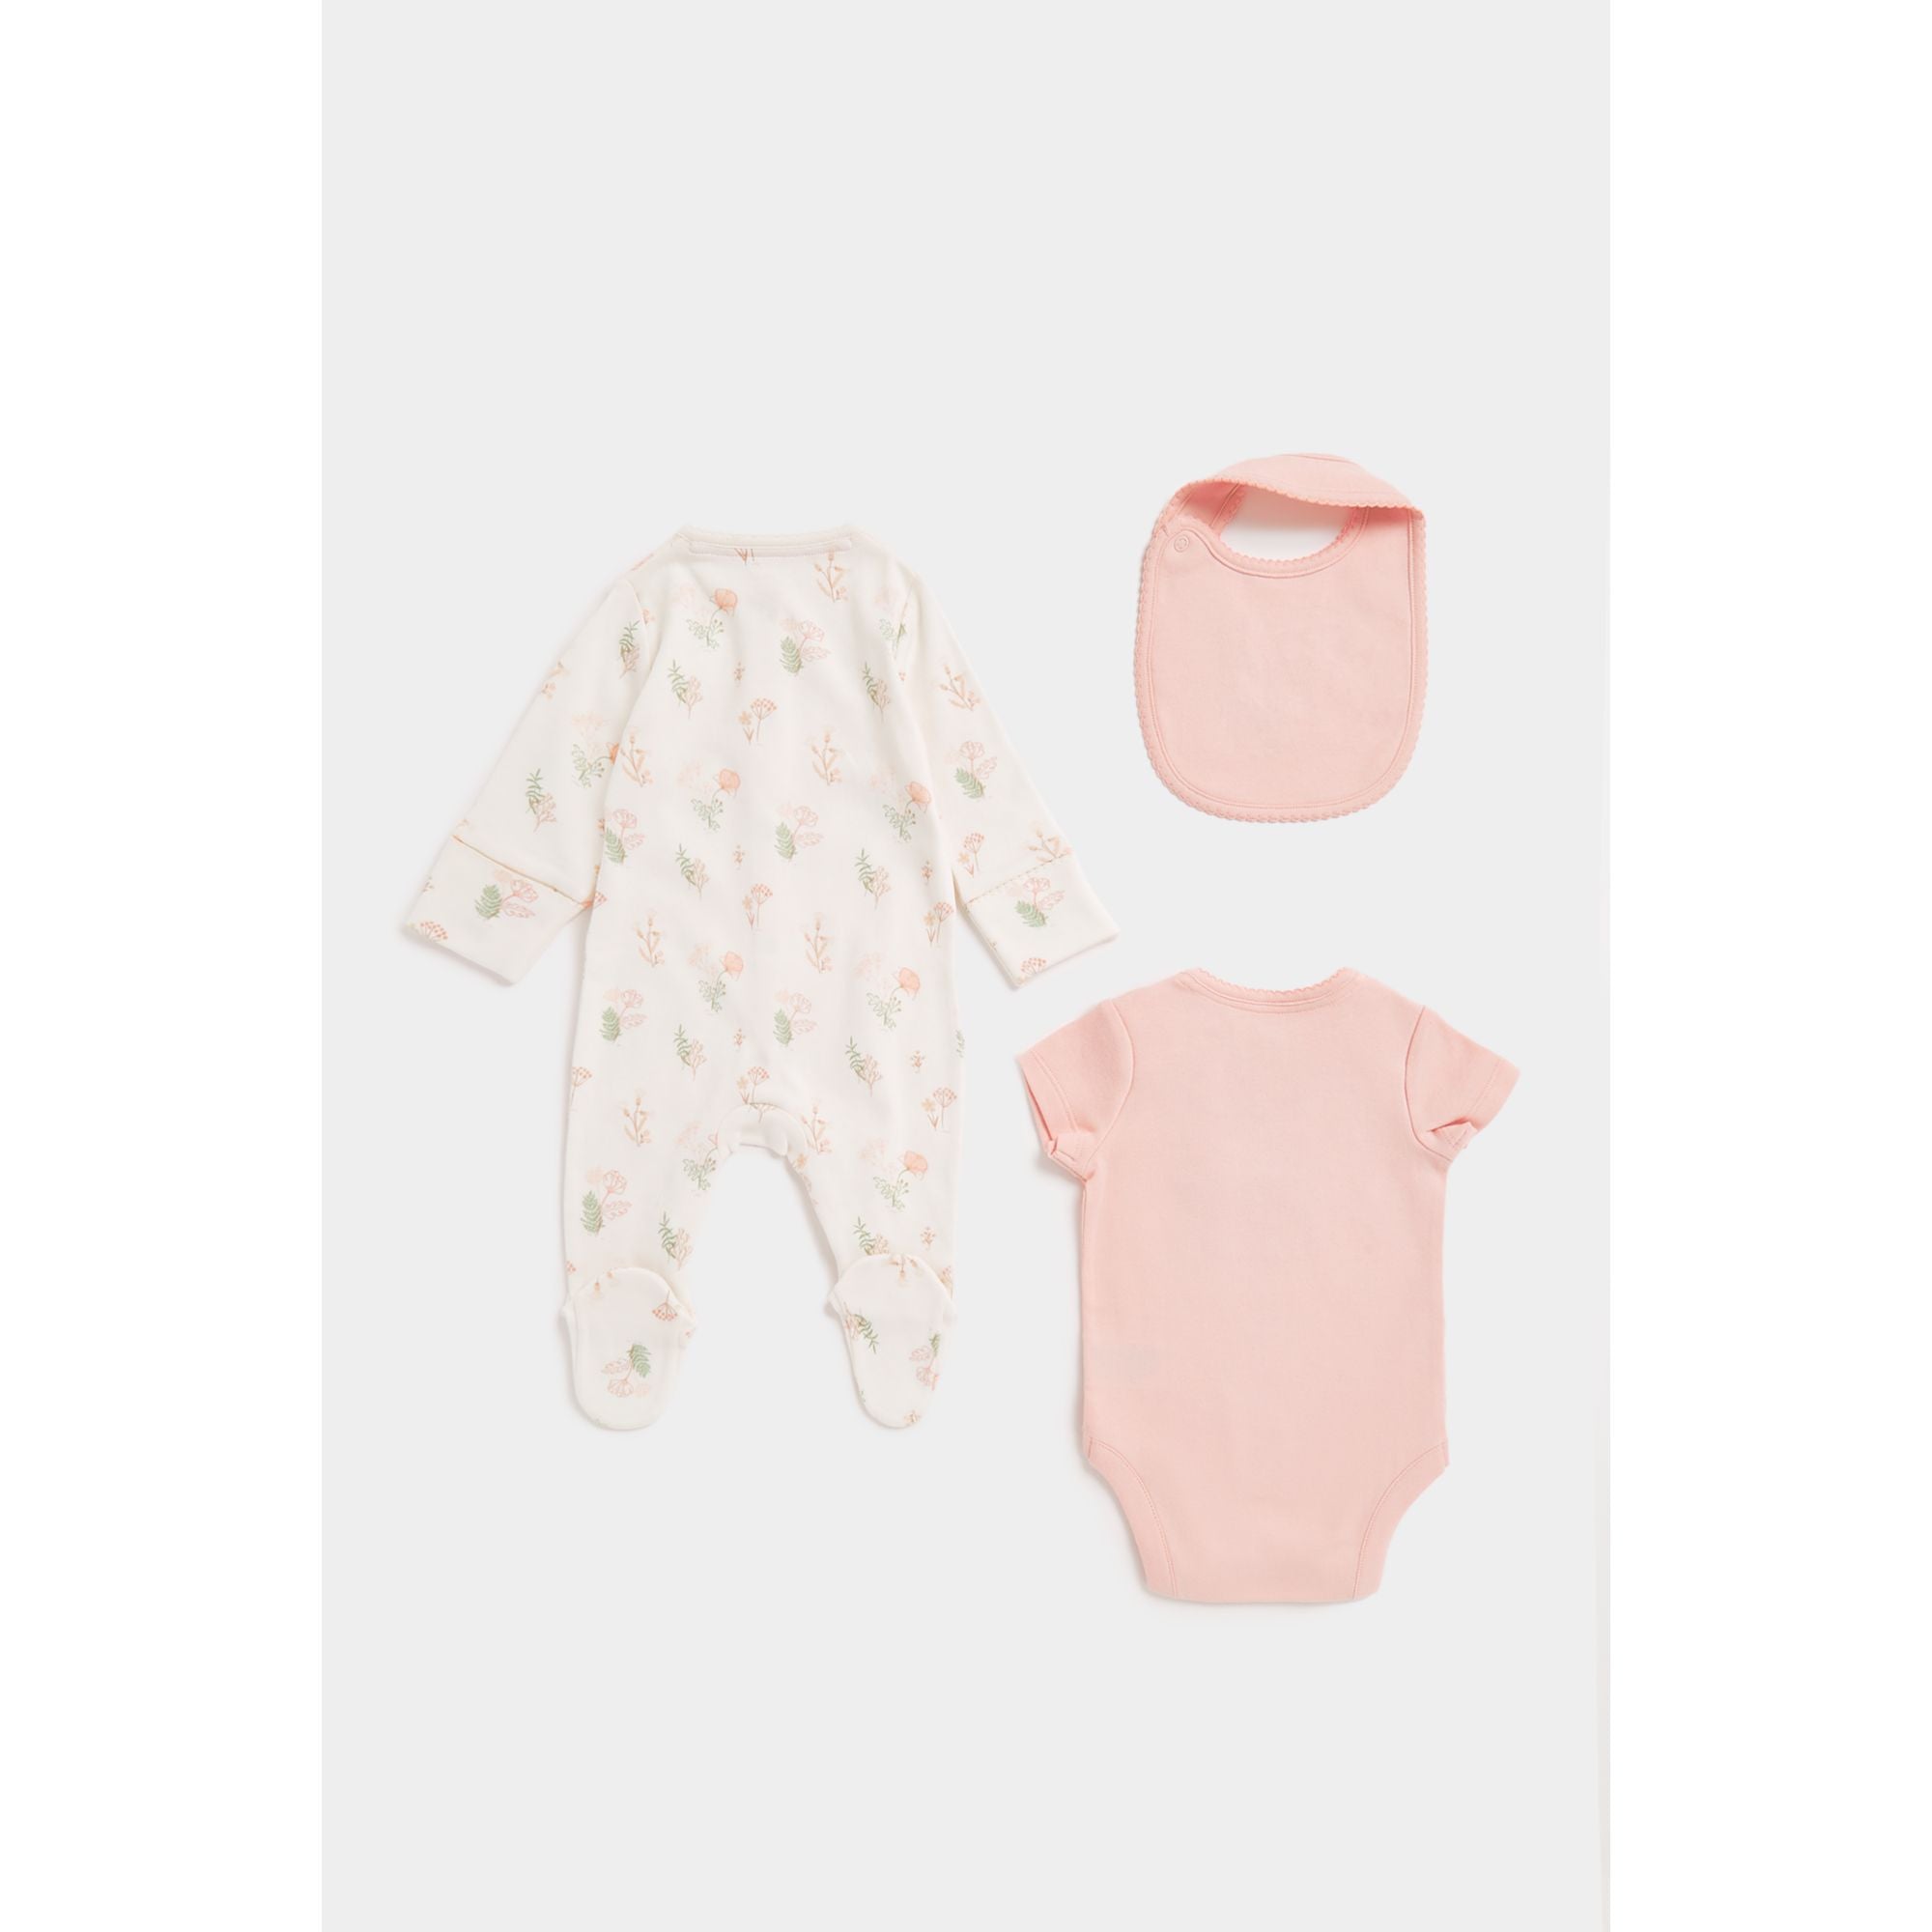 Mothercare My First All-in-One, Bodysuit and Bib Set